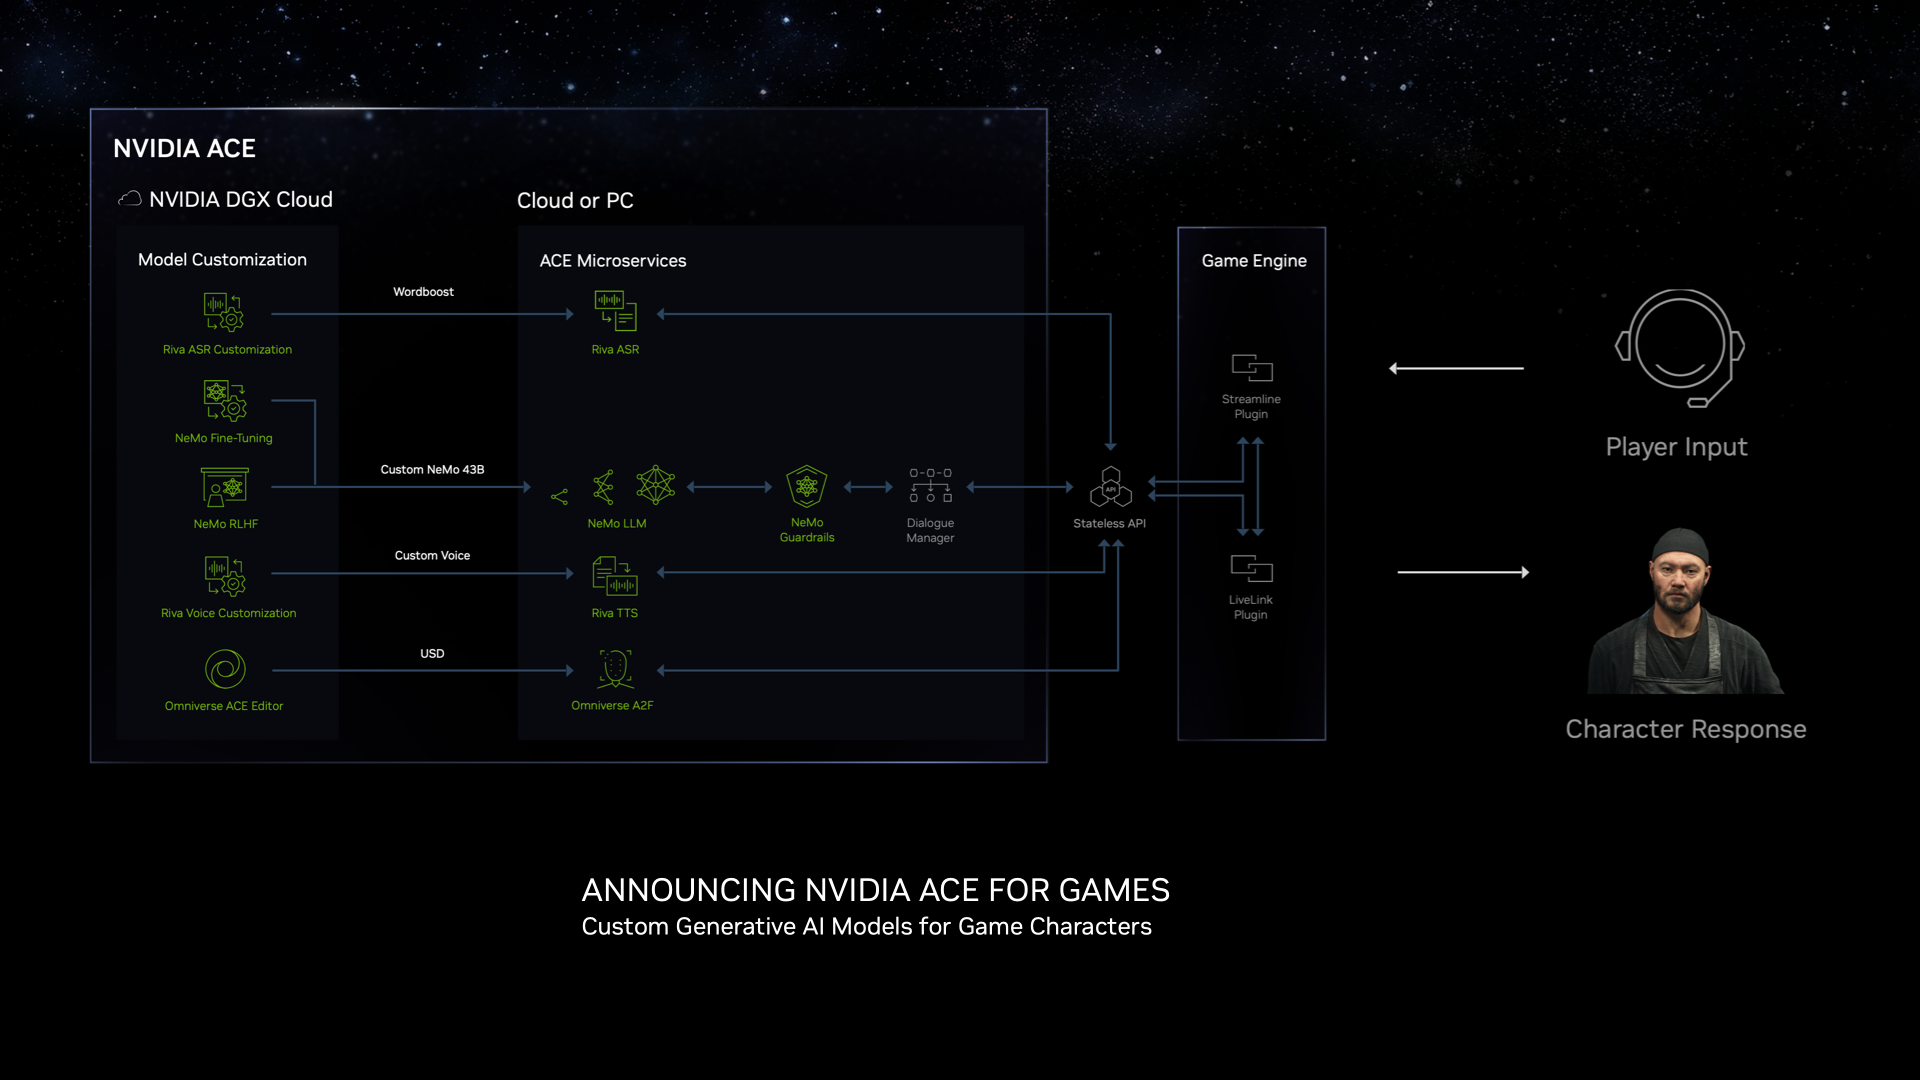 NVIDIA ACE for games